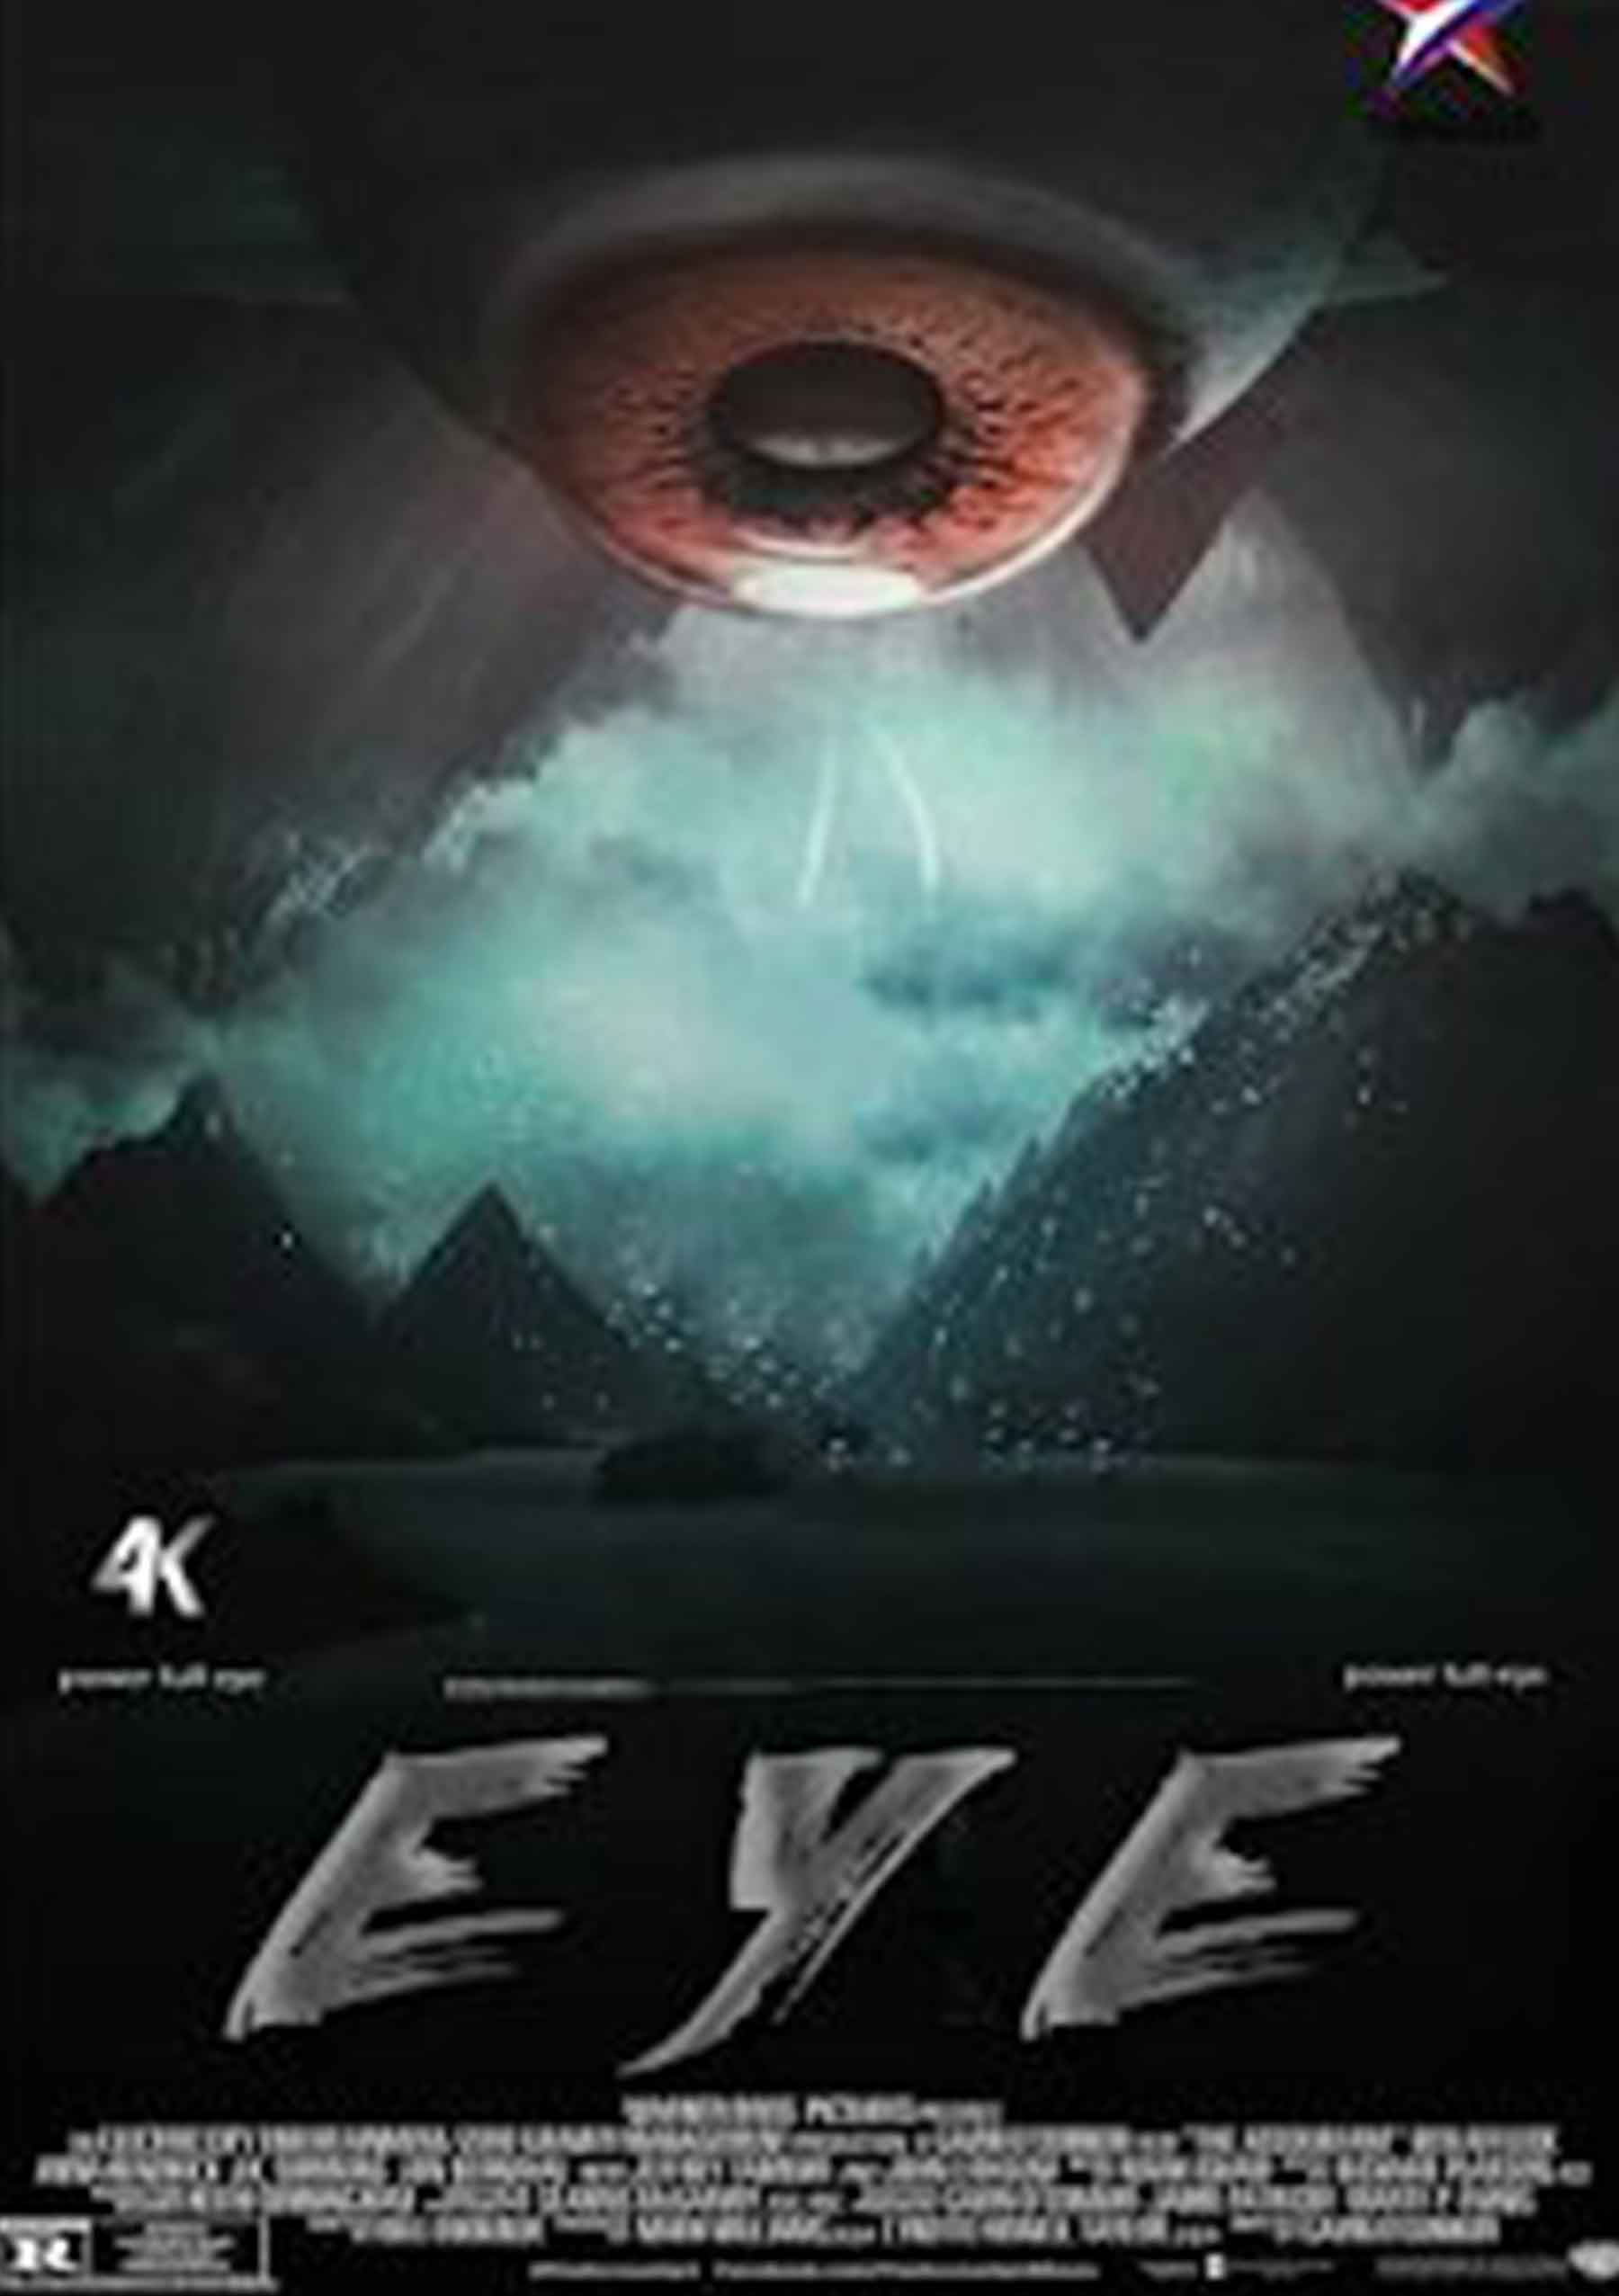 The Eye New Movie Poster Background Free Stock Image